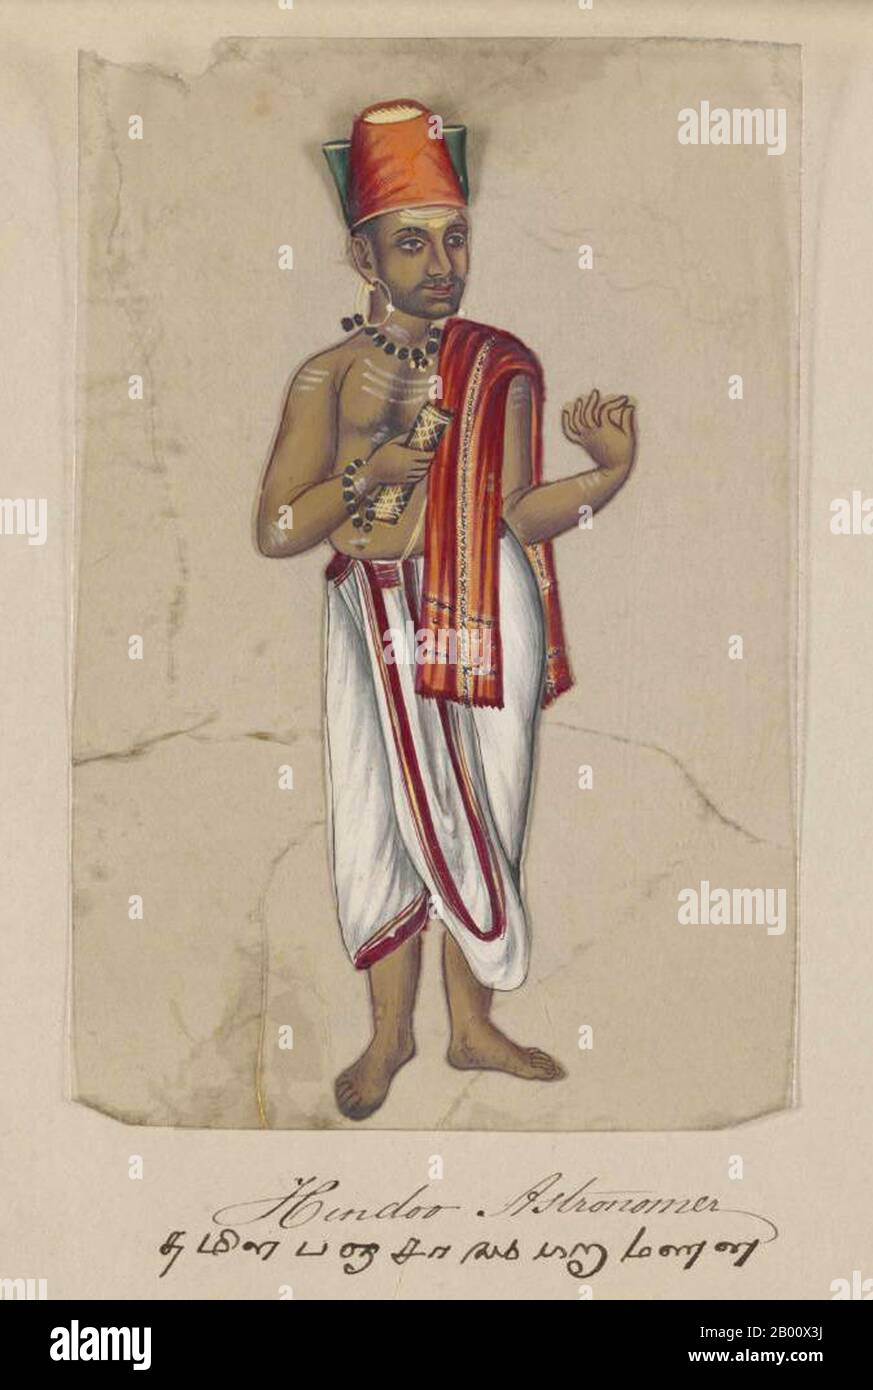 India: 'Hindoo/Hindu Astronomer'. Hand-colored image painted on a thin sheet of mica from a manuscript entitled: ‘Seventy-Two Specimens of Caste in India’ (Madura, southern India: 1837).  The full book consists of 72 full-color hand-painted images of men and women of the various castes and religious and ethnic groups found in Madura, Tamil Nadu, at that time. The manuscript shows Indian dress and jewelry adornment in the Madura region as they appeared before the onset of Western influences on South Asian dress and style. Each illustrated portrait is captioned in English and in Tamil. Stock Photo